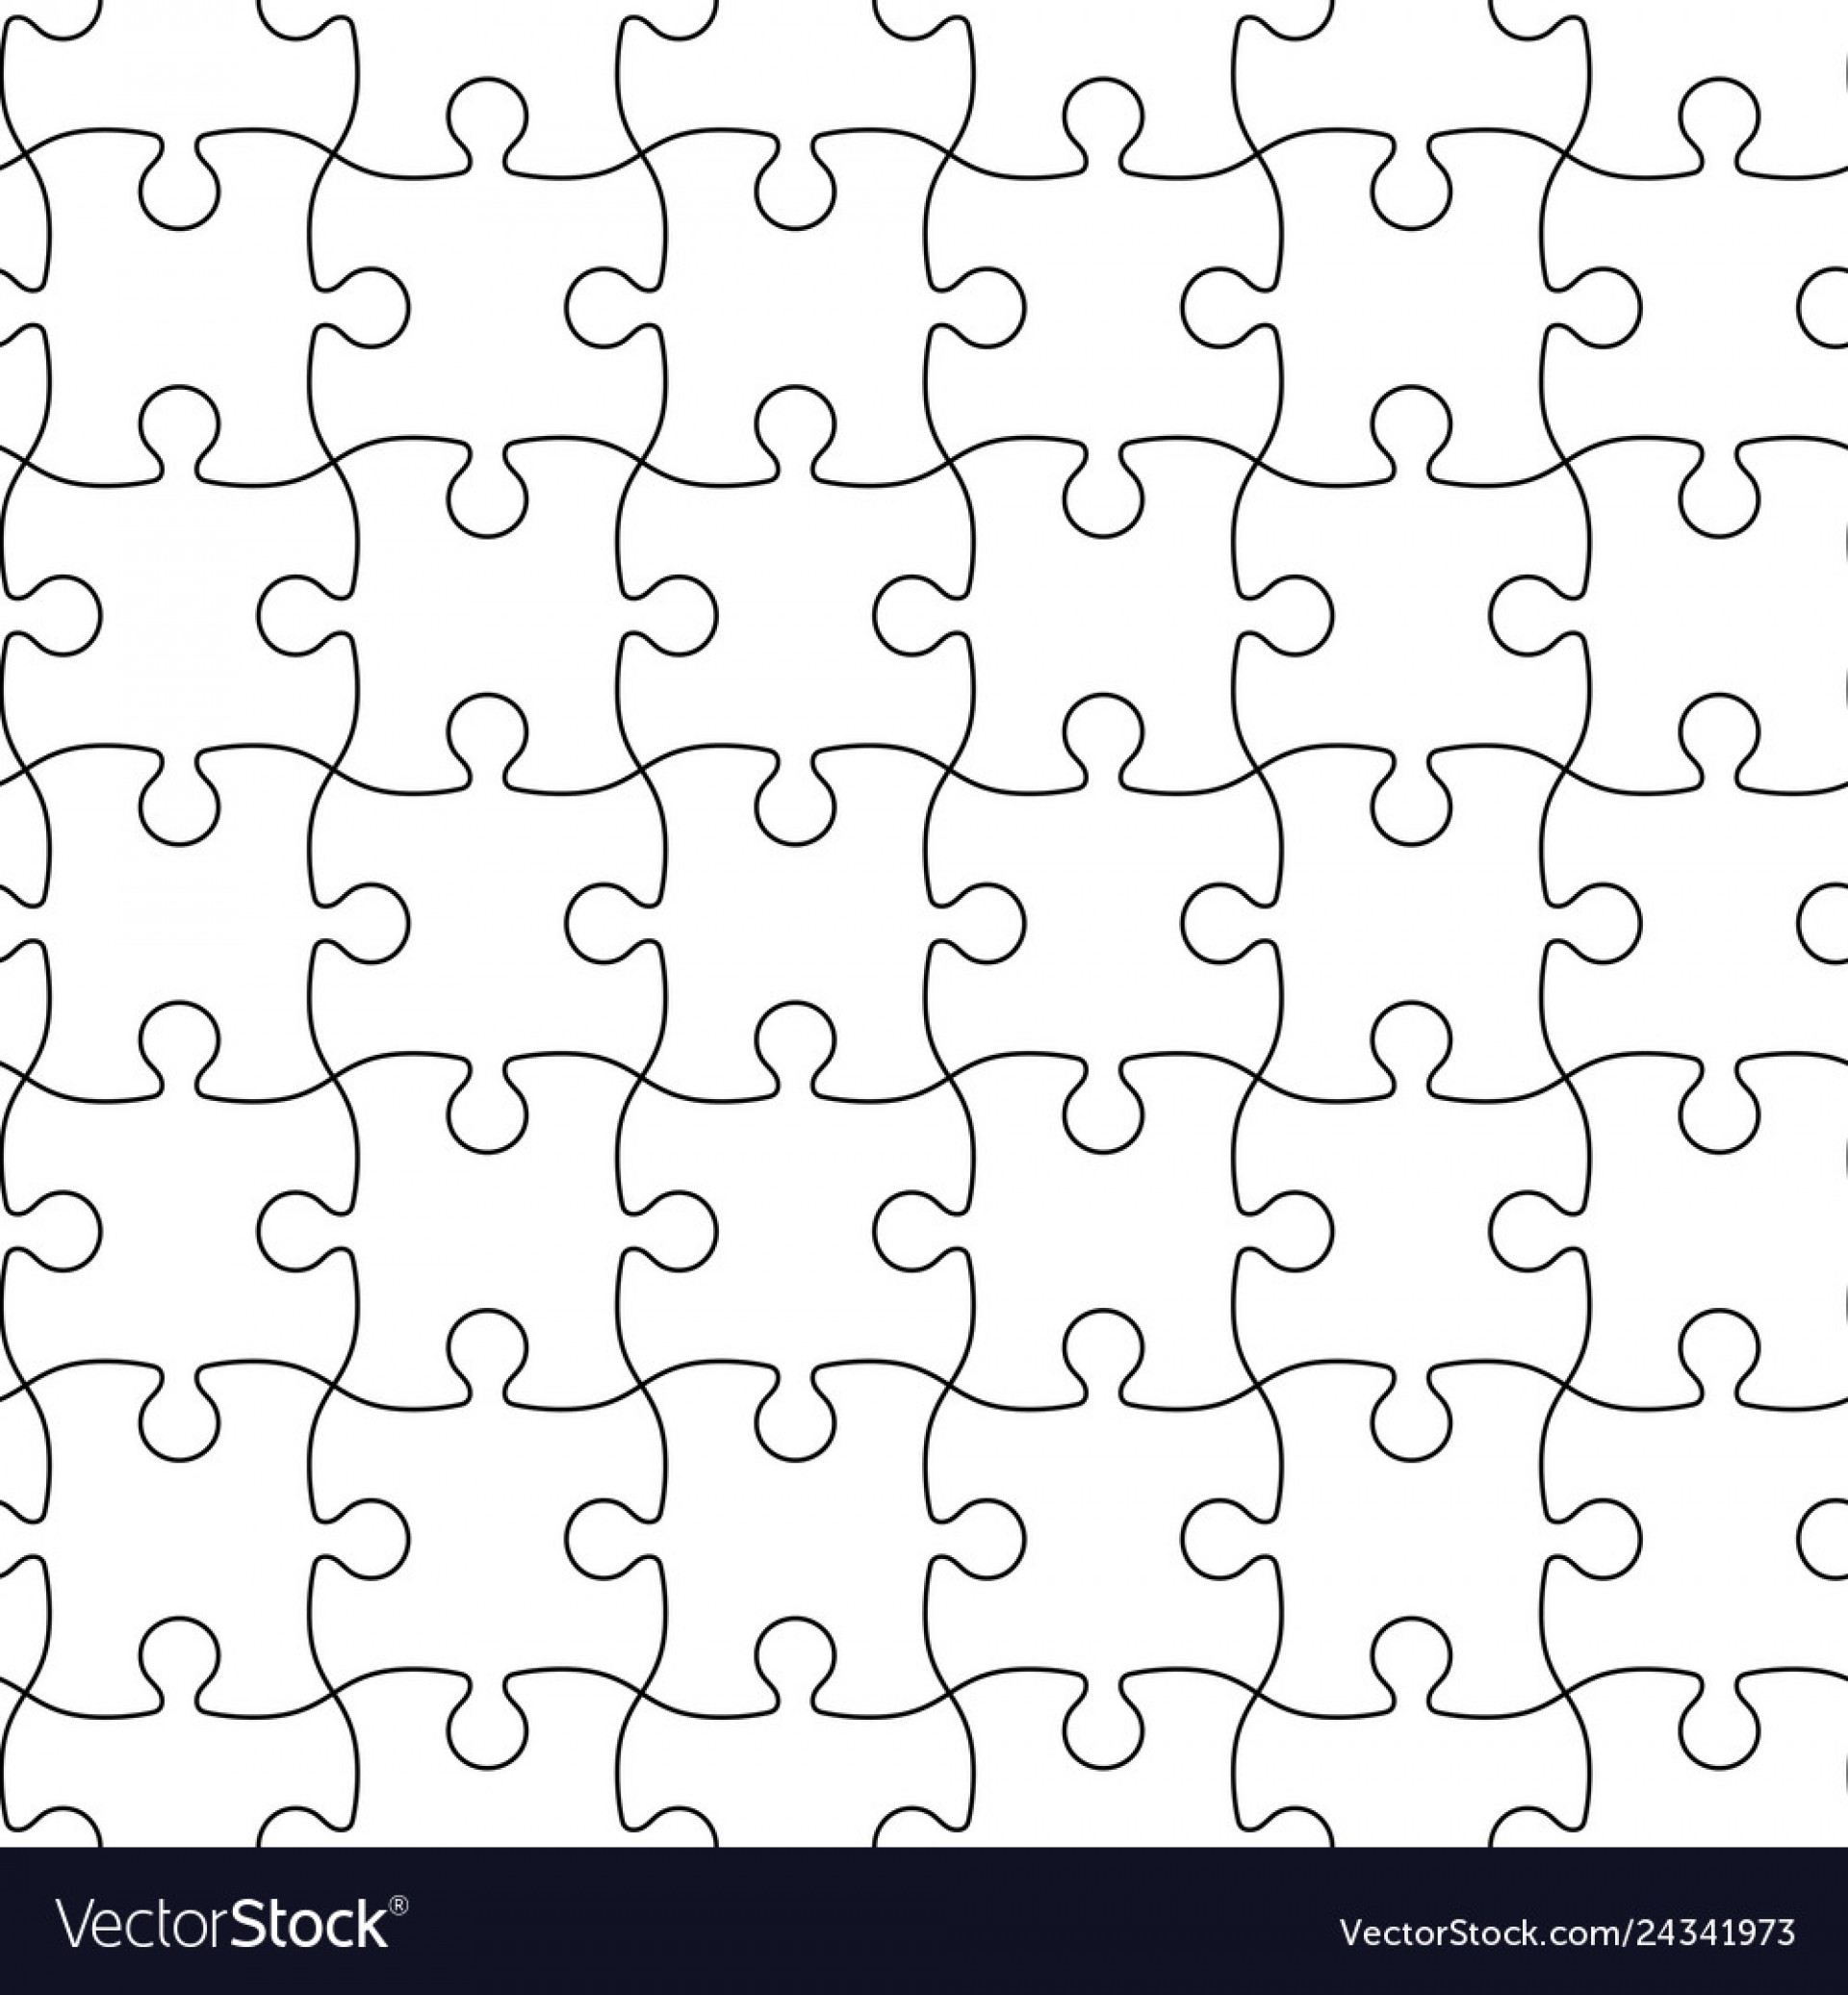 jigsaw puzzle maker free download